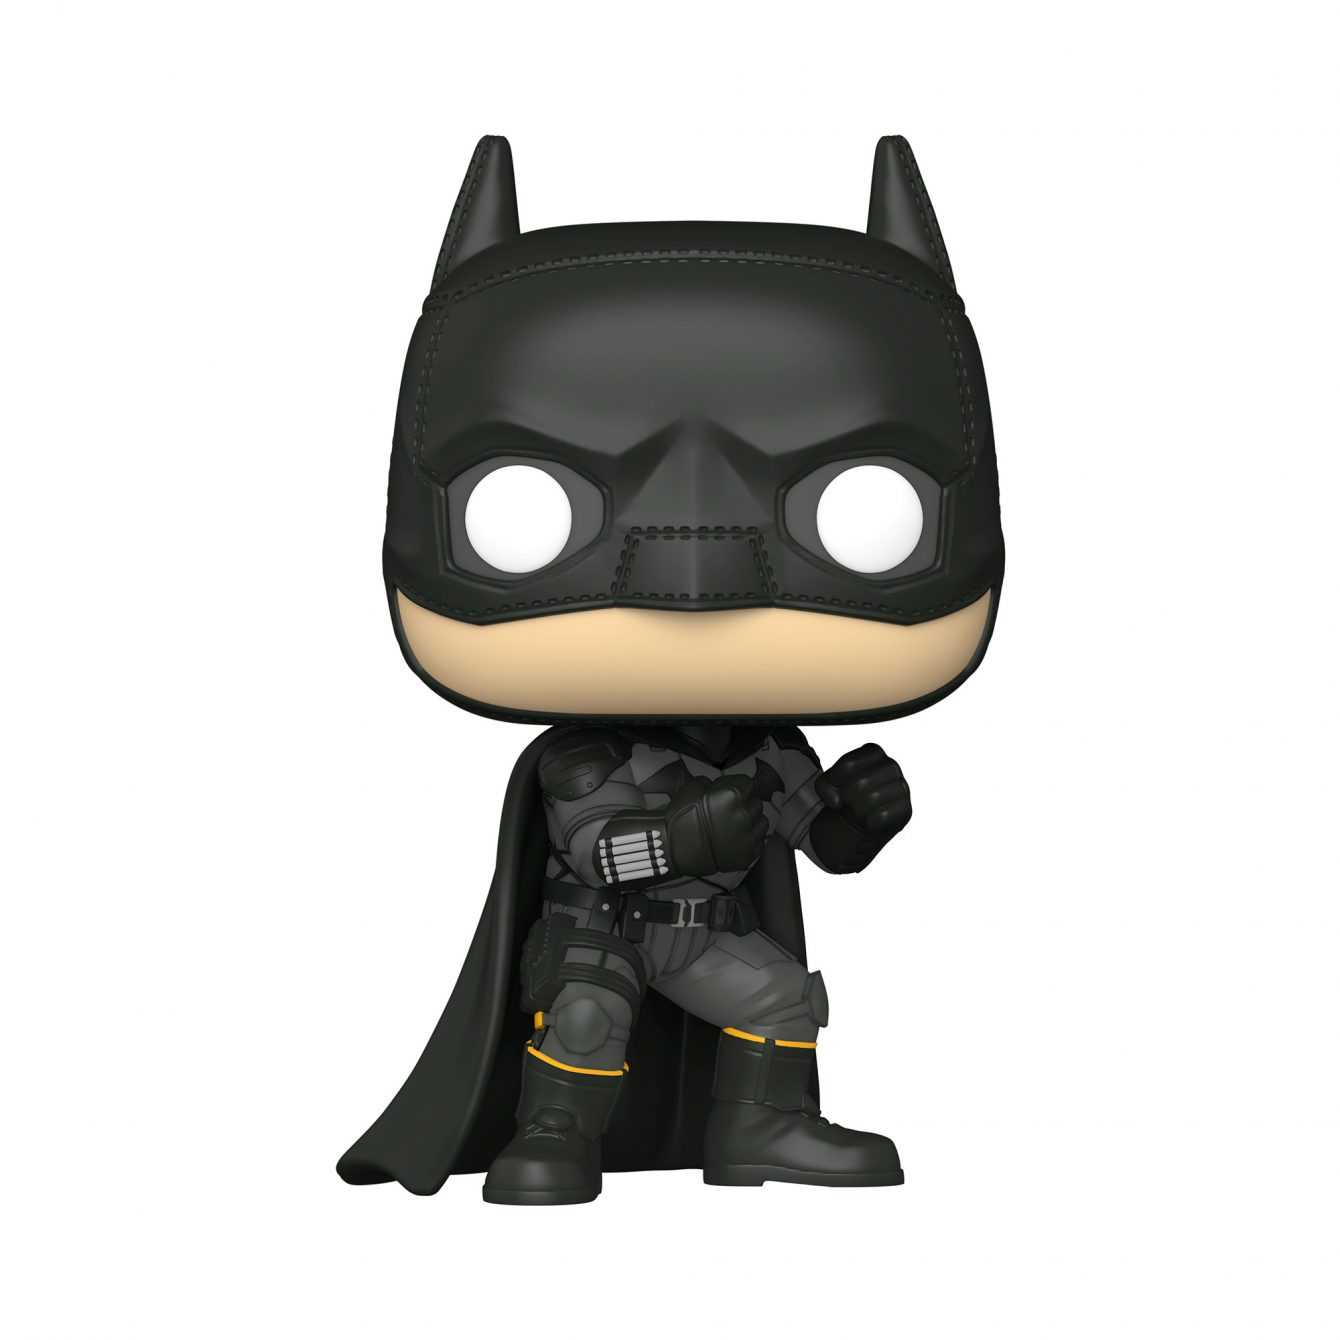 The Batman: waiting for the film, here are gadgets and themed costumes!